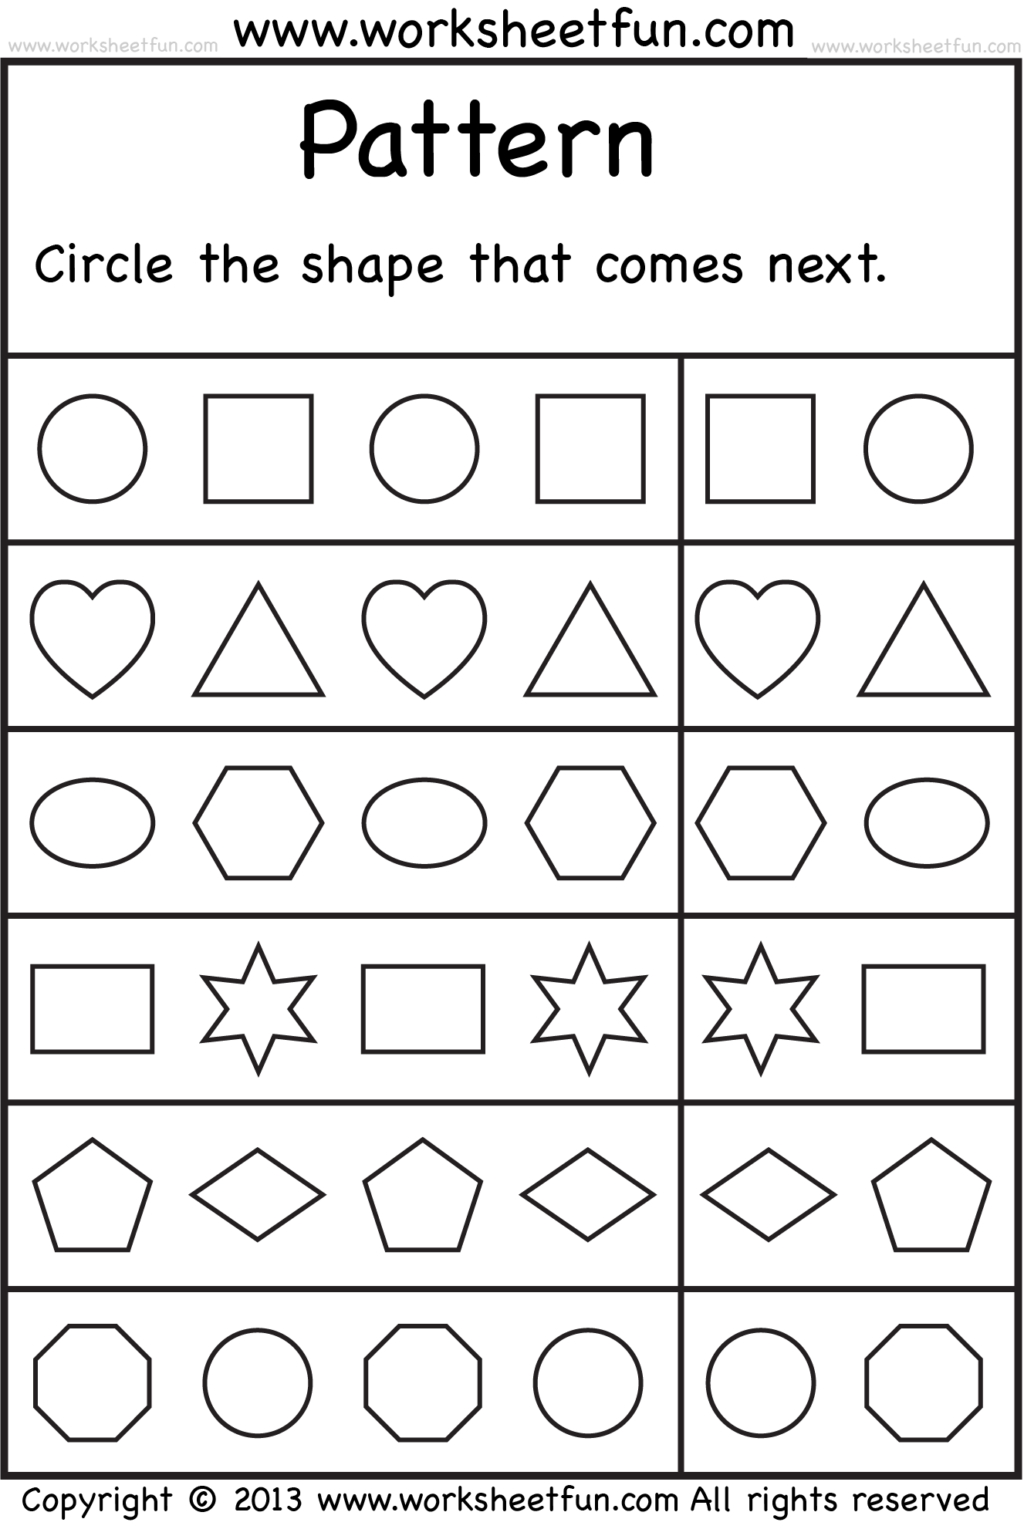 Worksheet ~ Free Printable Worksheets For Toddlers Age And